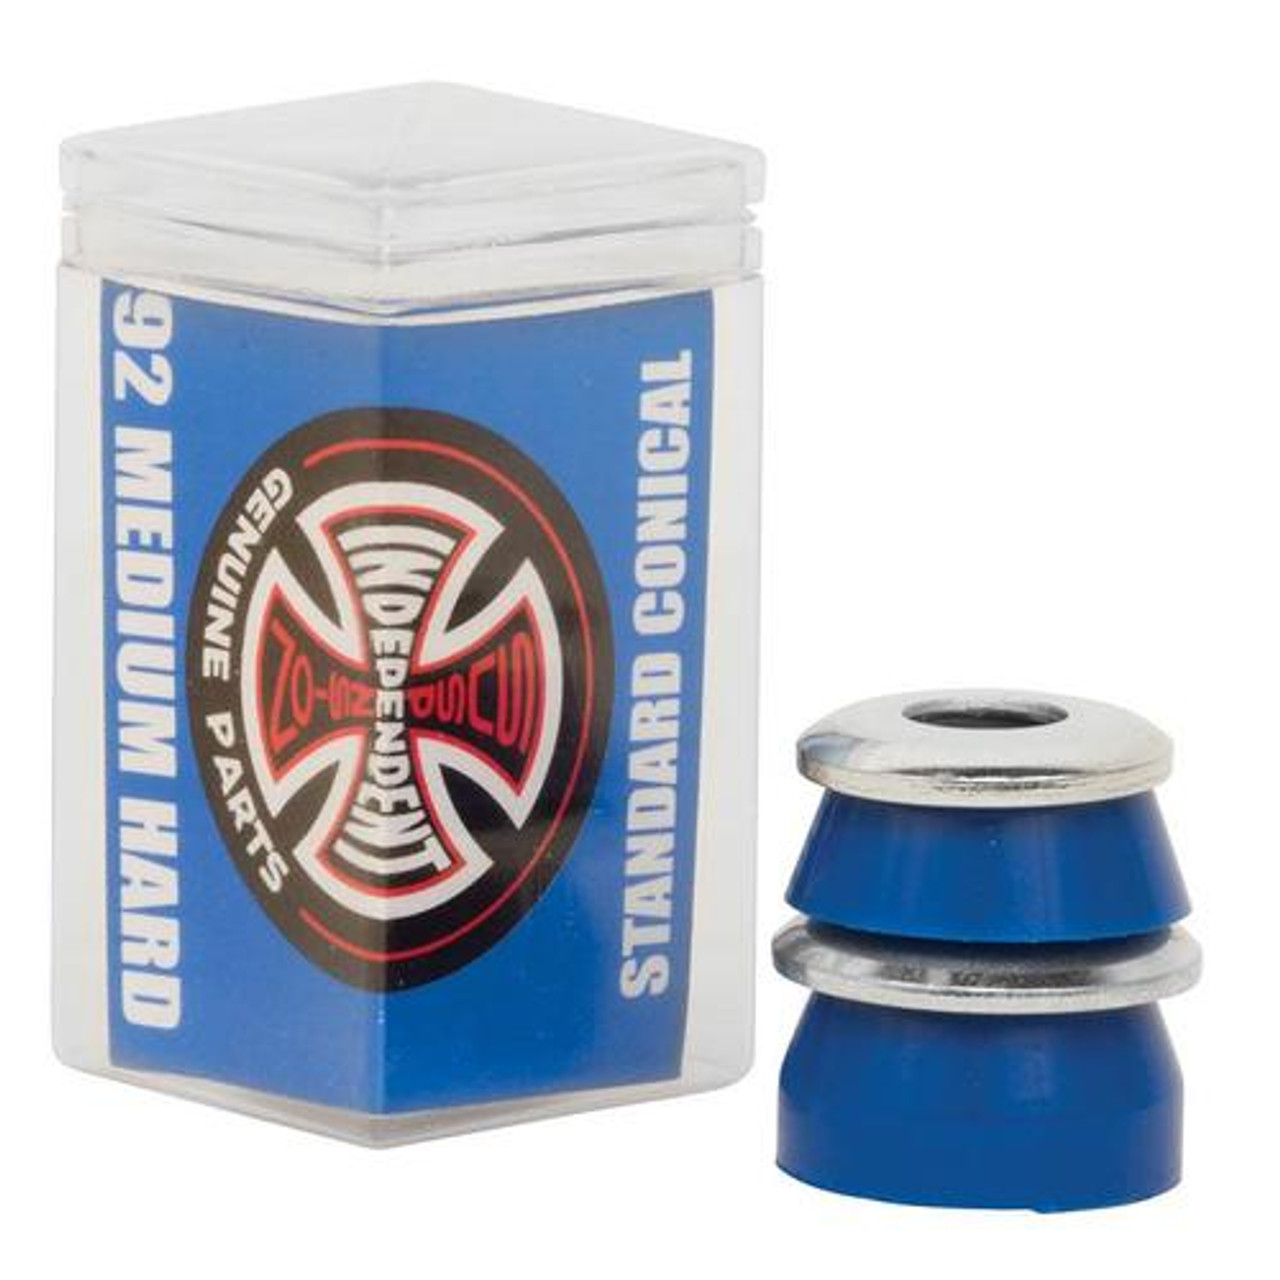 Independent 92a Conical Medium Hard Bushings